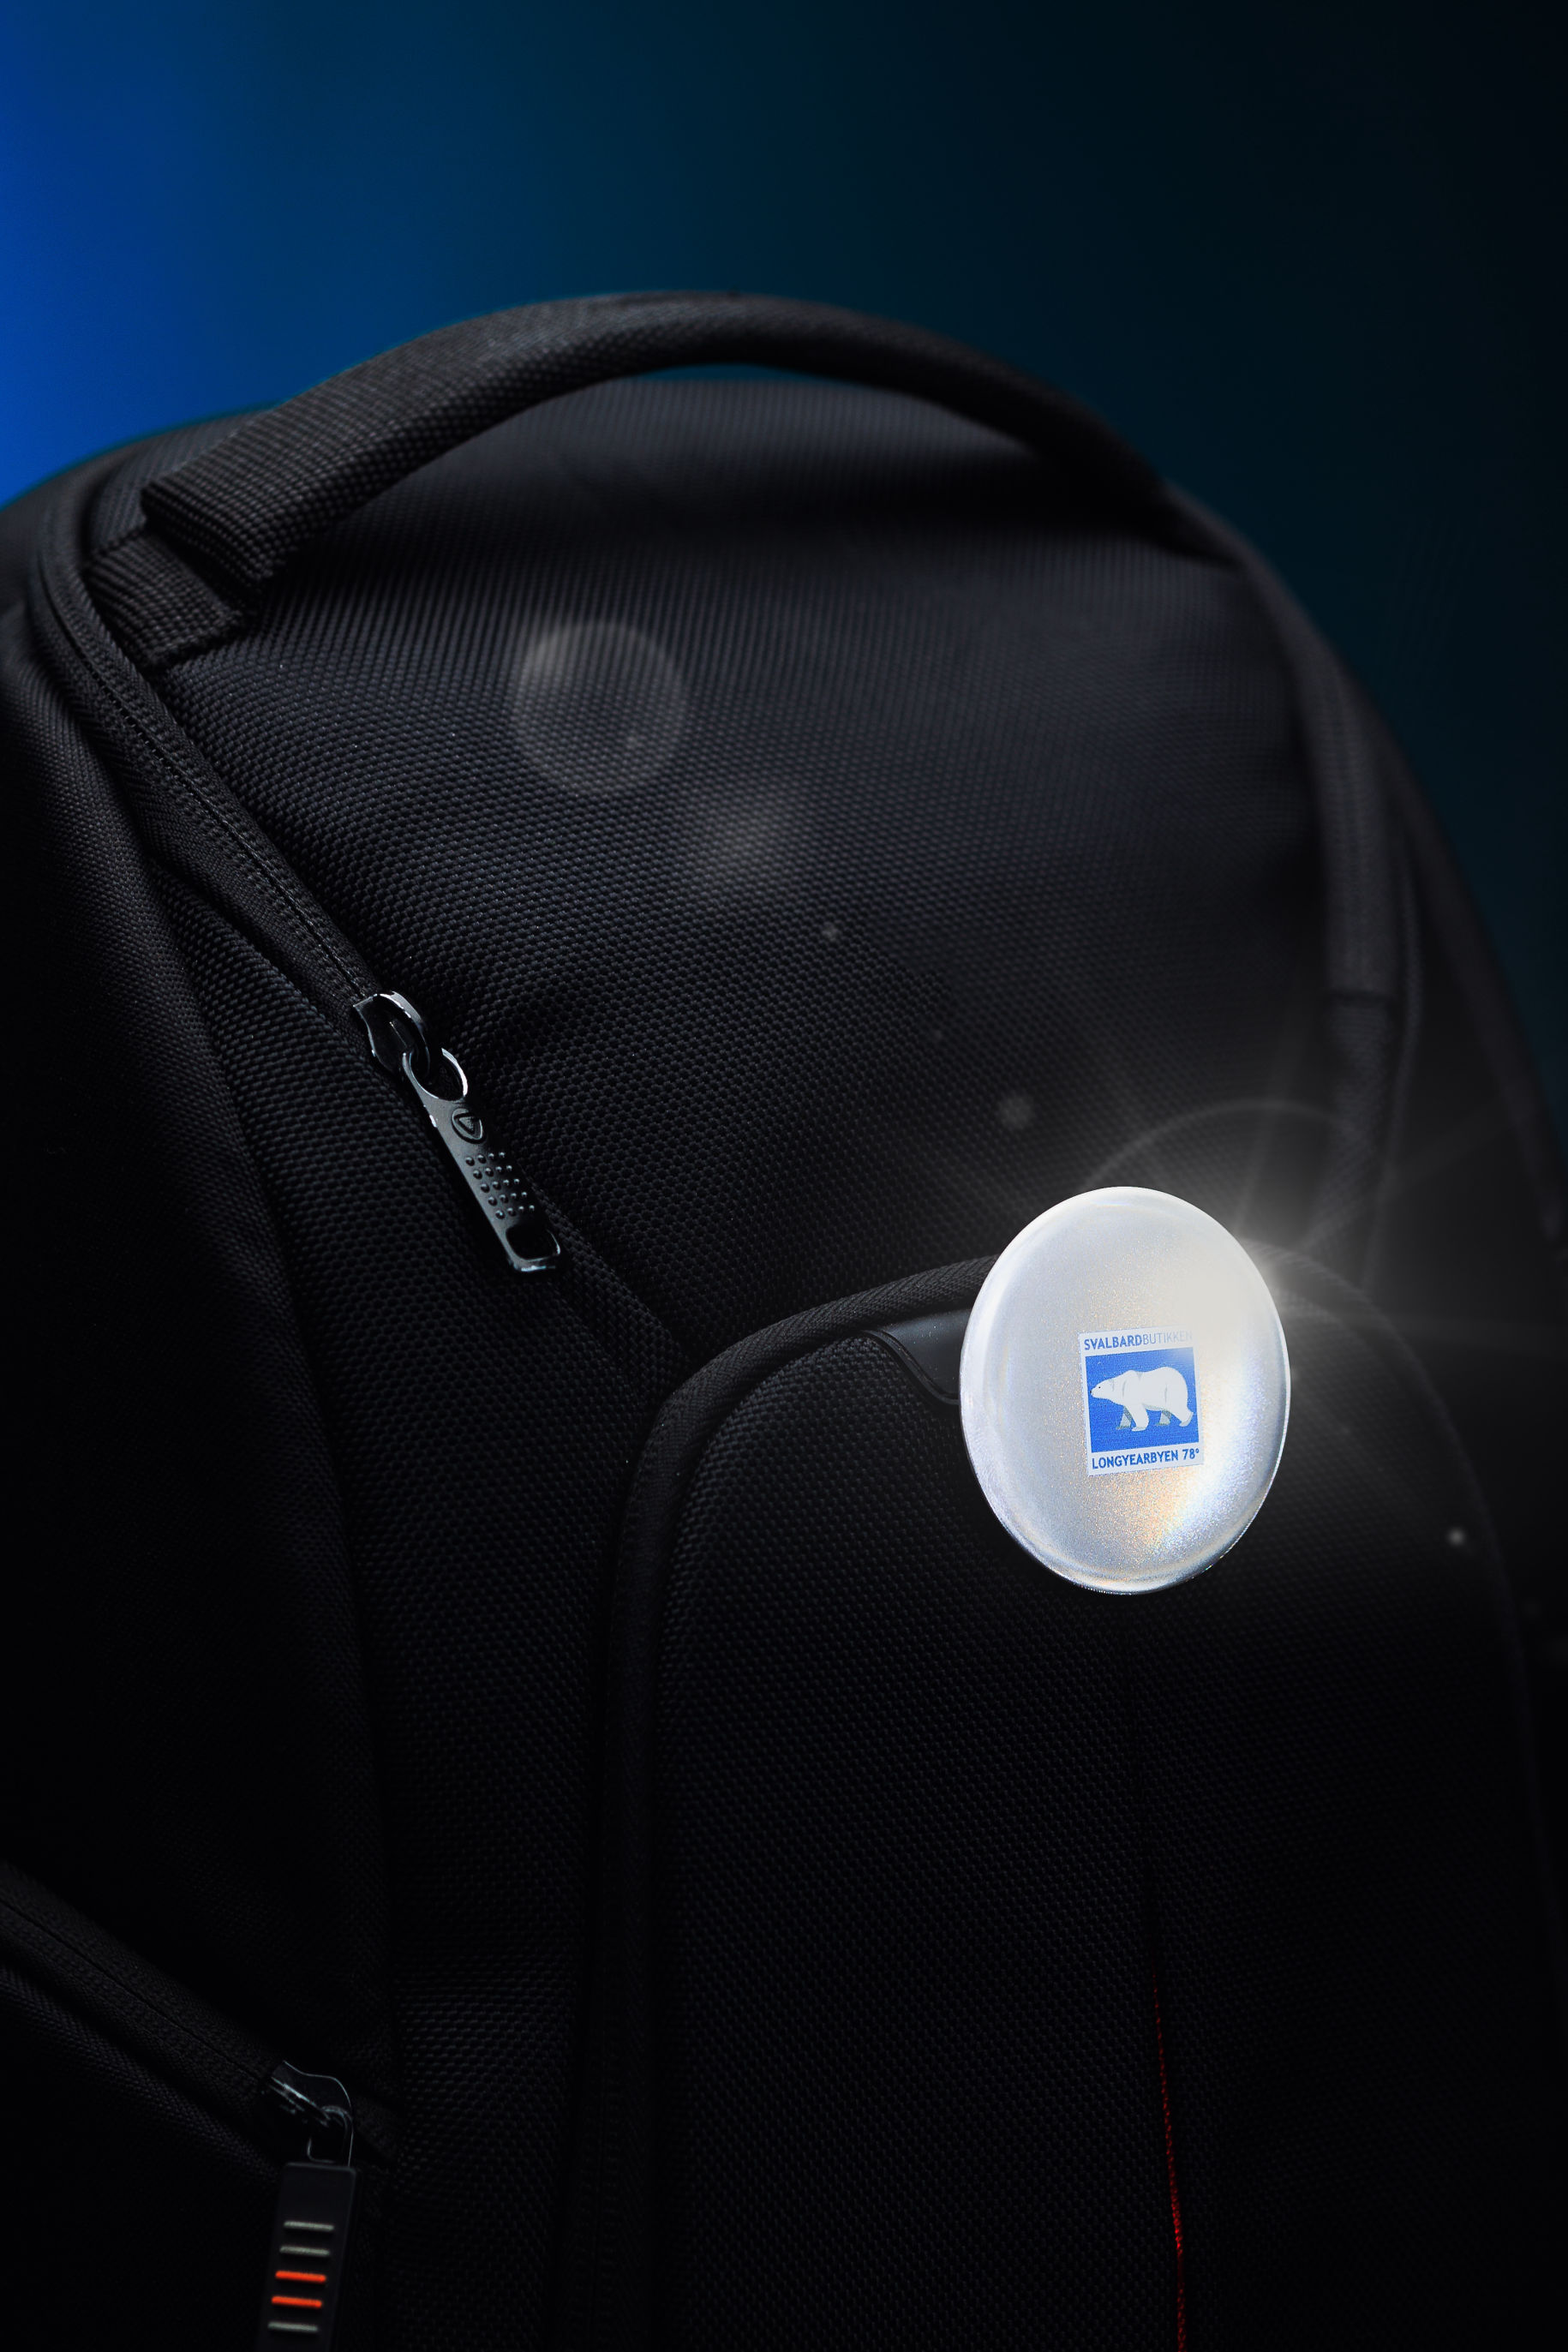 Branded button on backpack